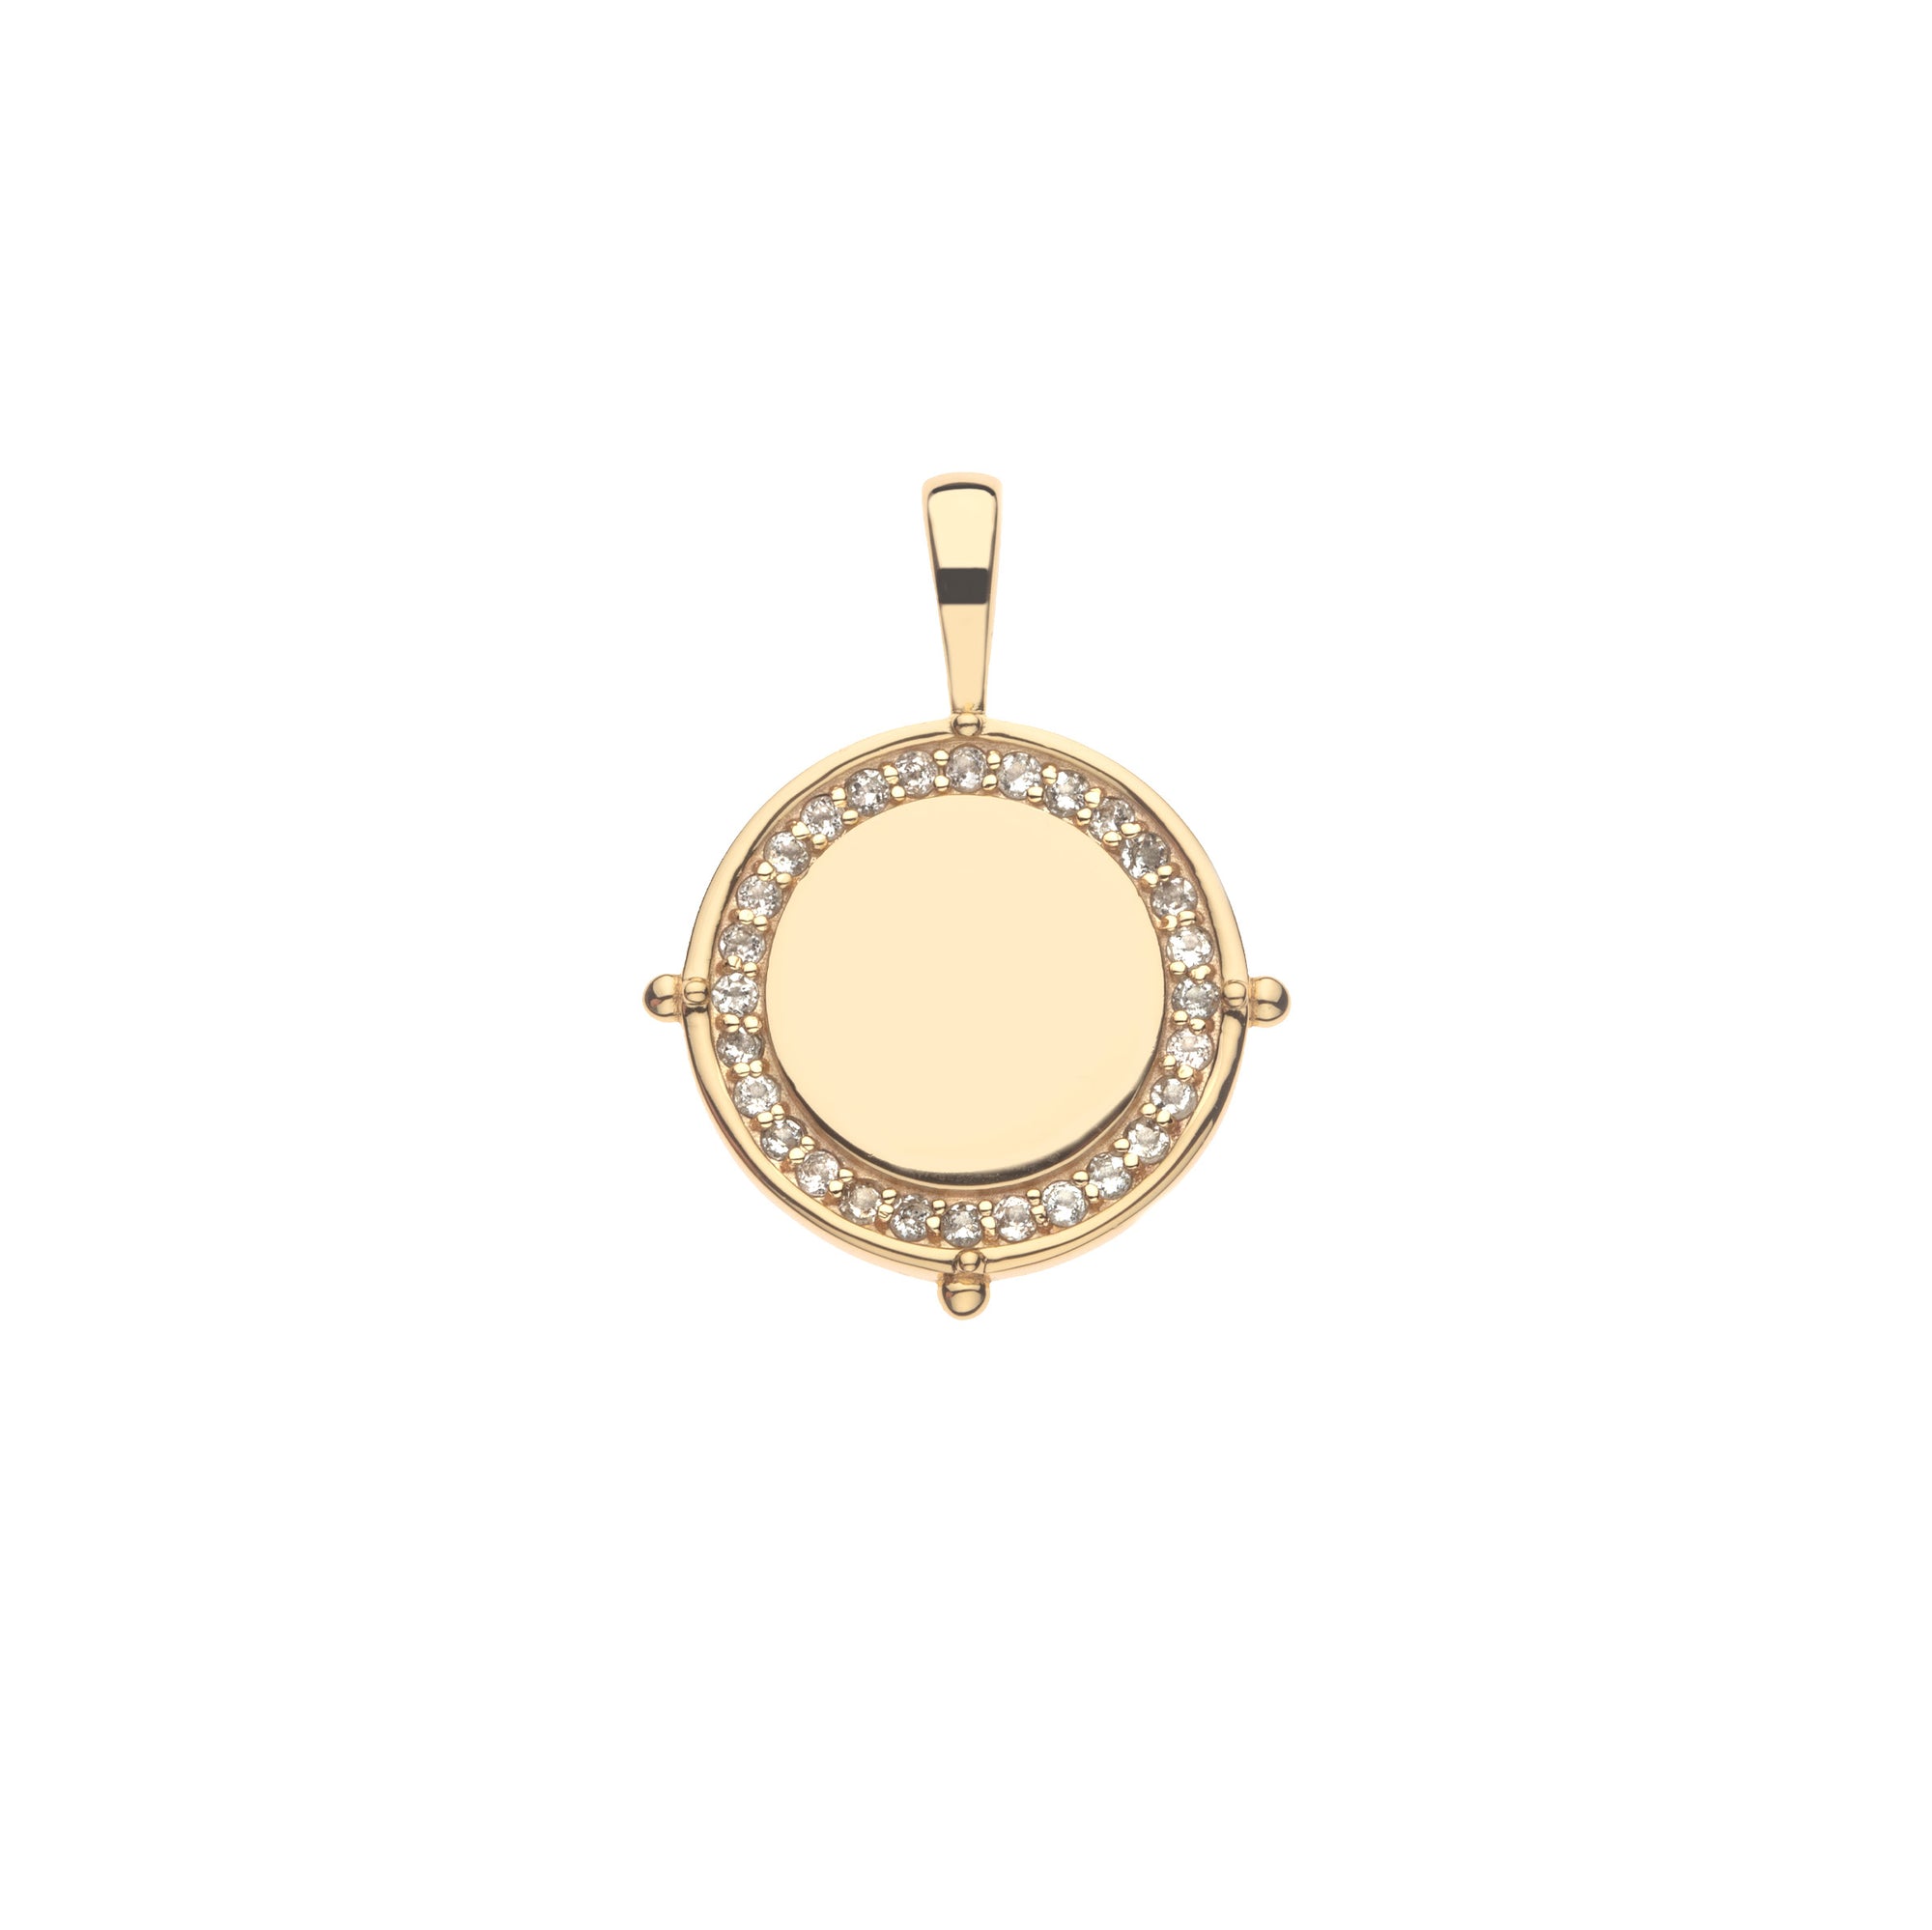 Embellished Personalized Petite Coin Pendant